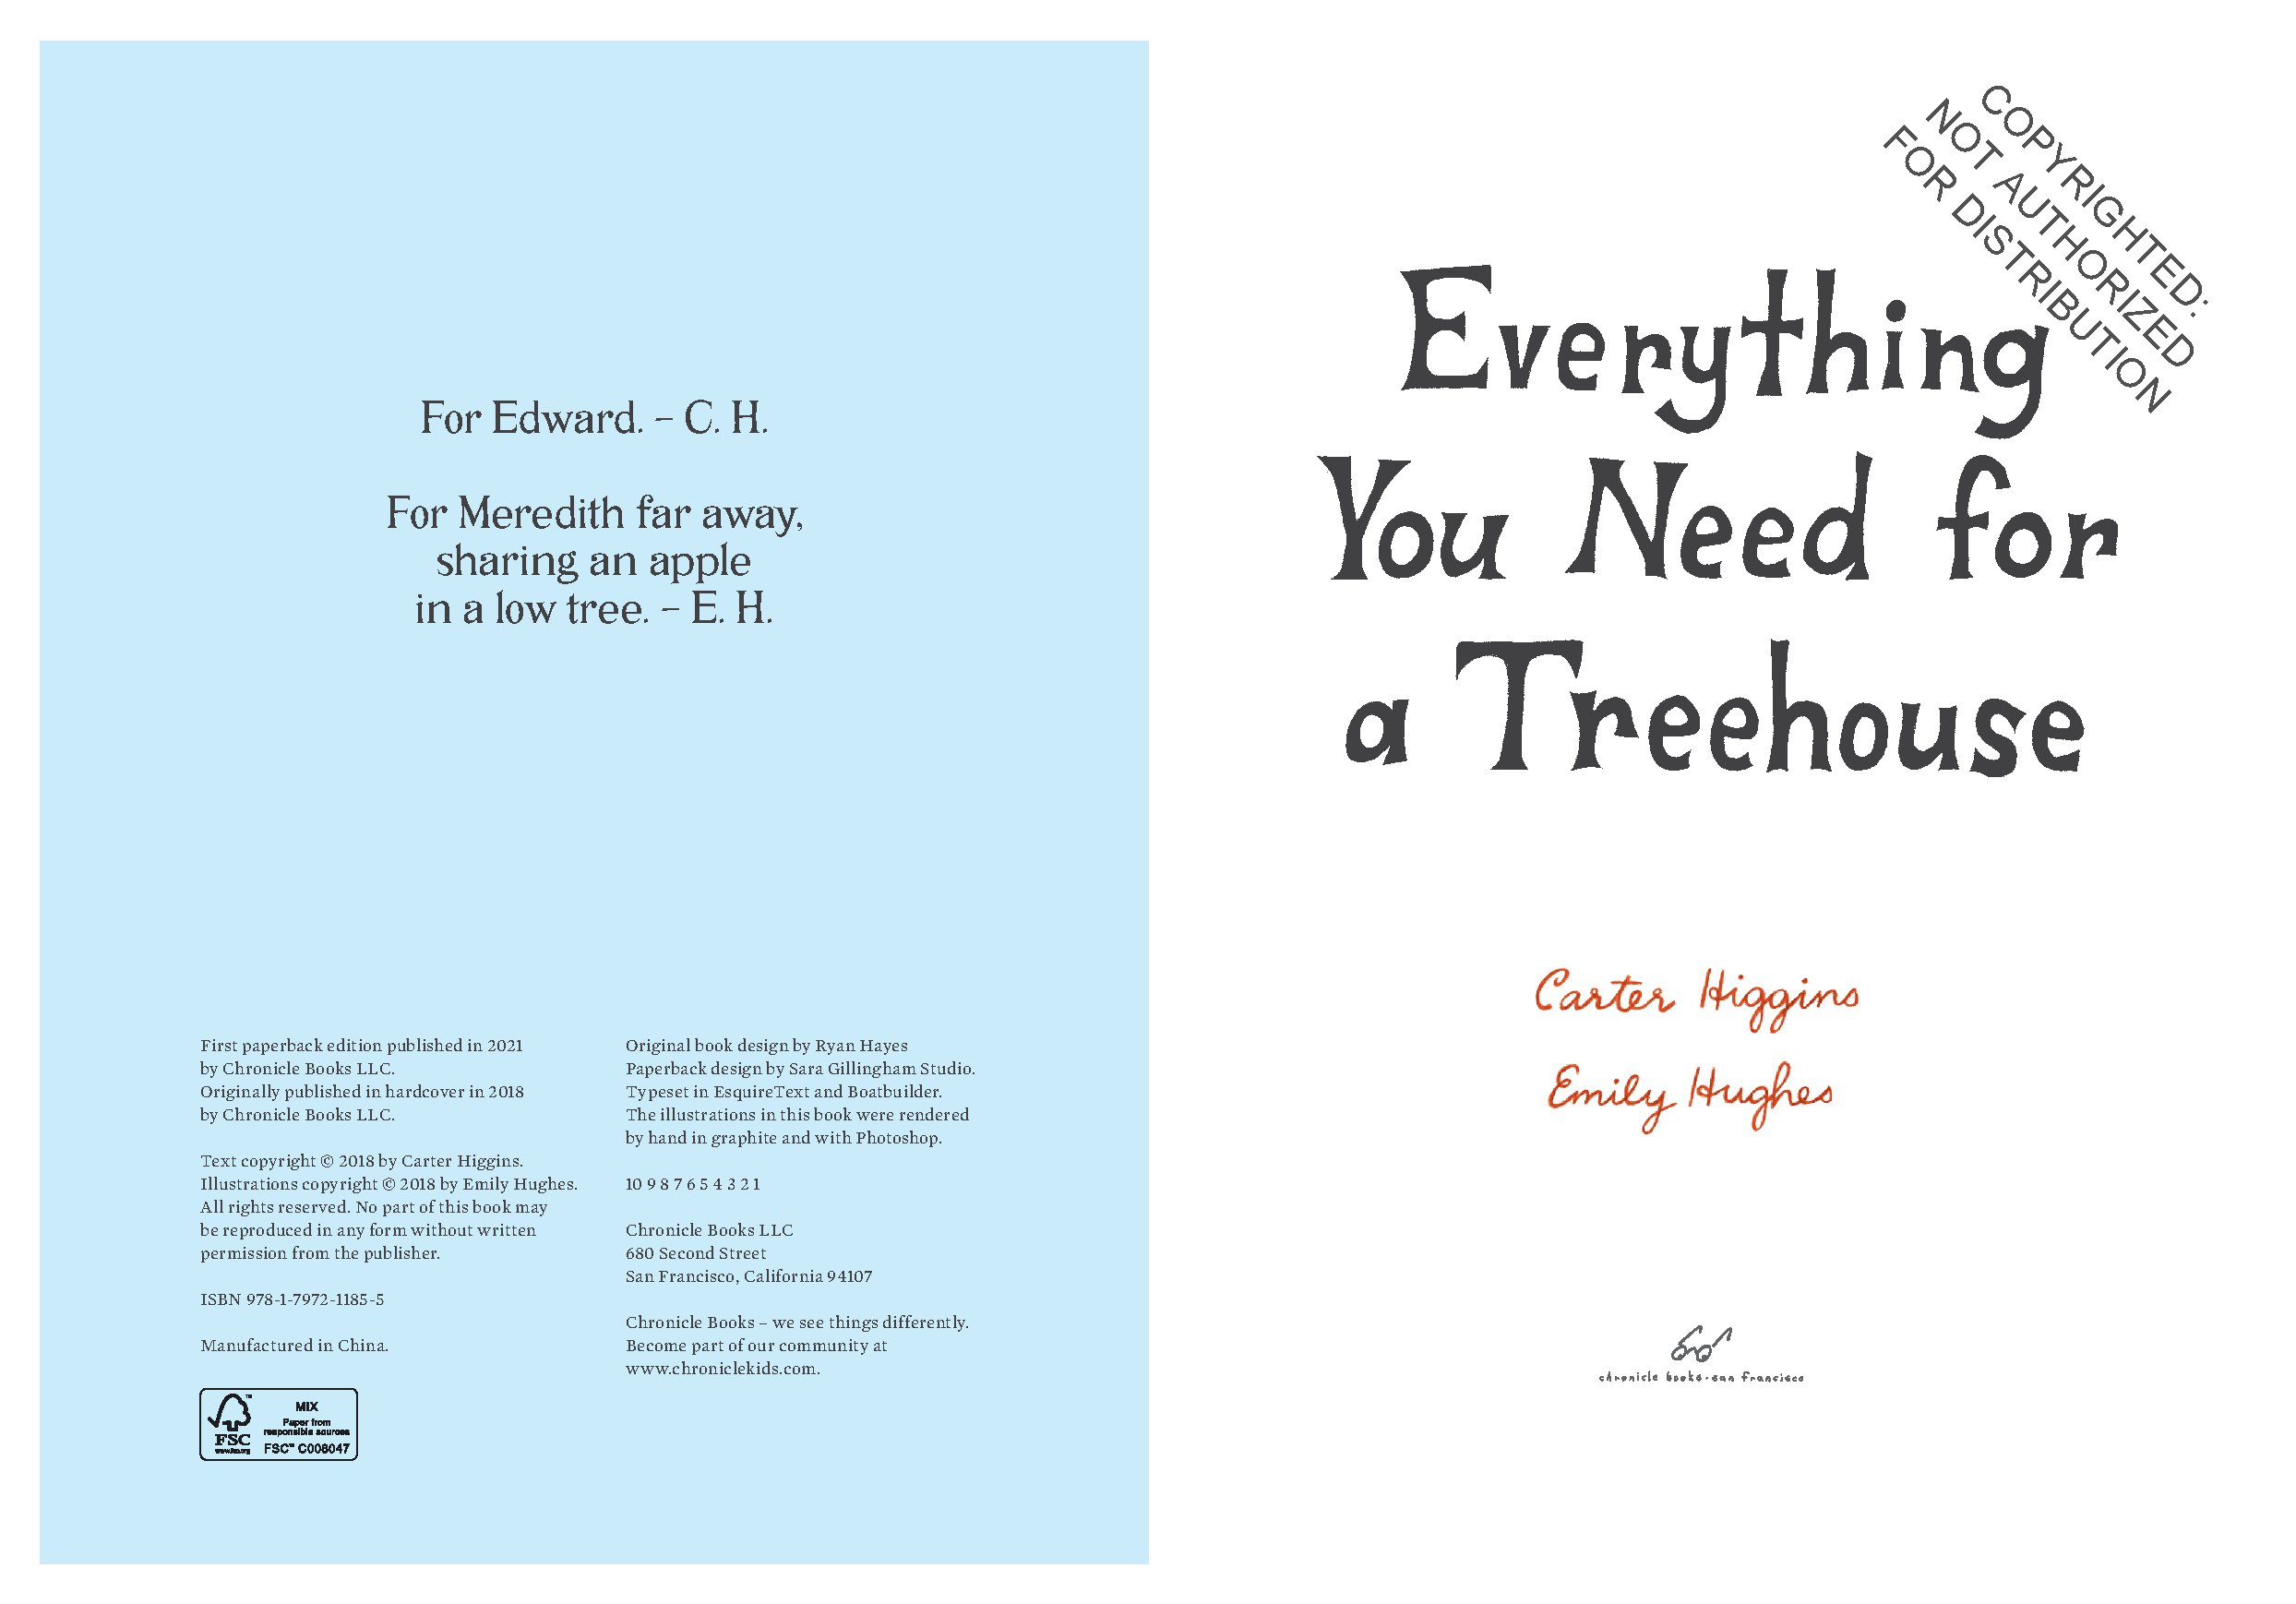 Everything You Need for a Treehouse (international pb)